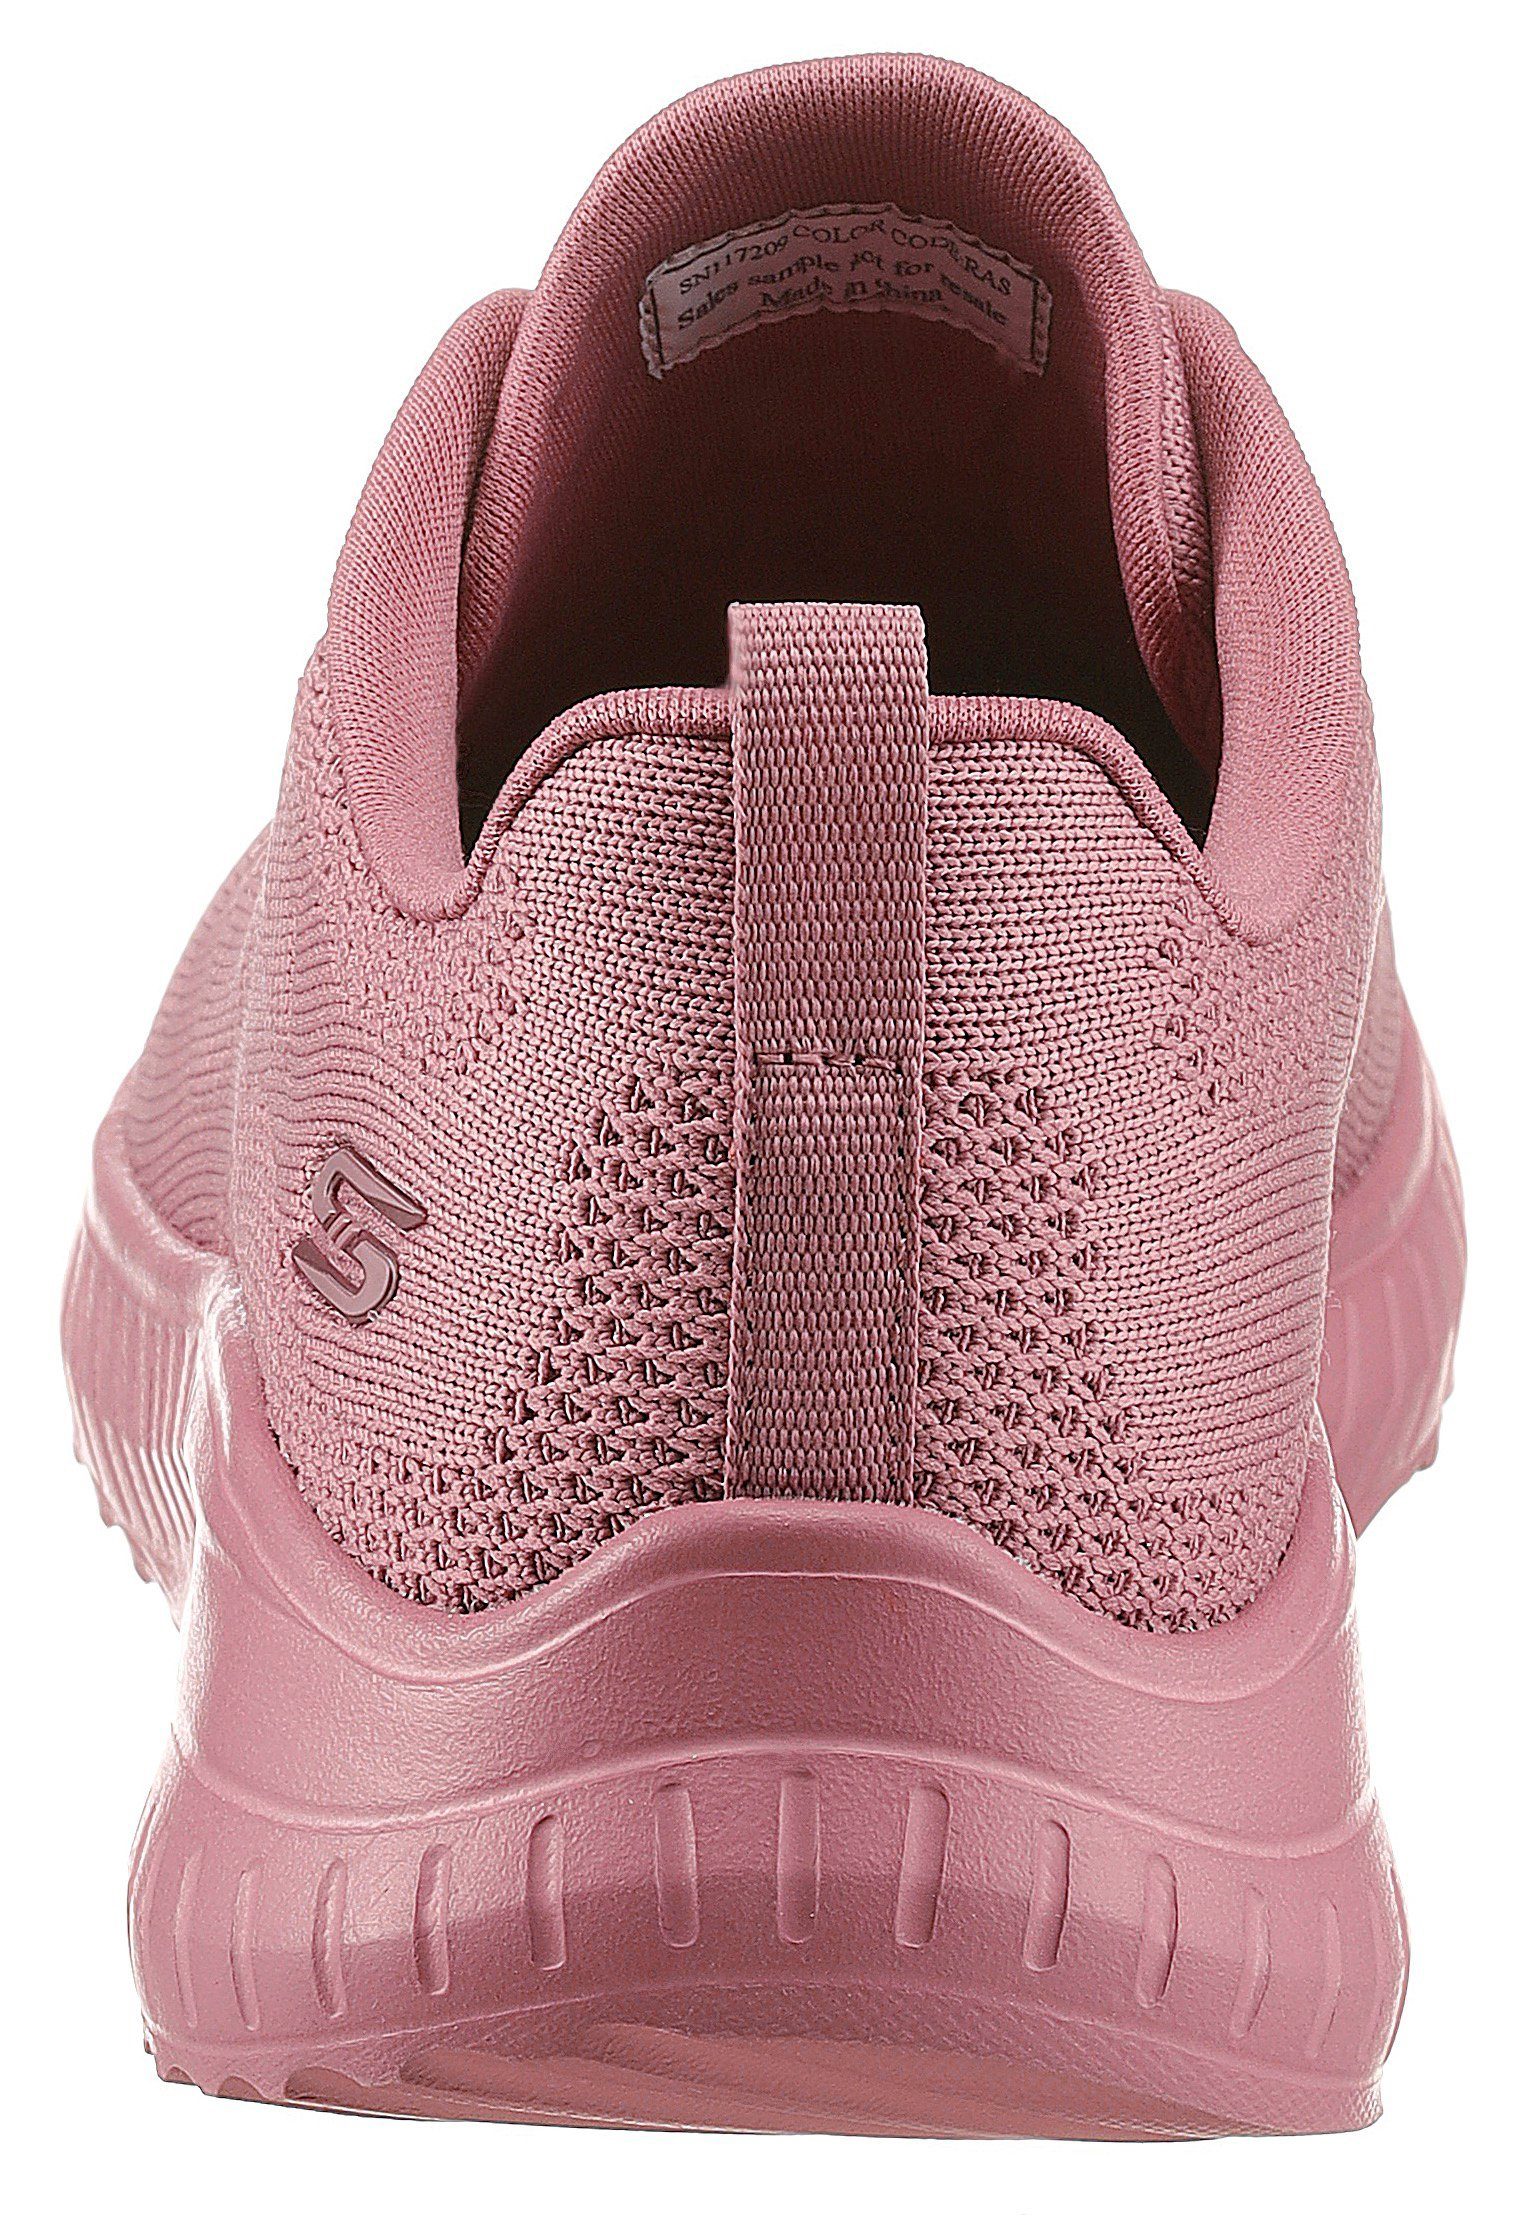 Sneaker OFF himbeere Skechers SQUAD BOBS FACE mit Innensohle CHAOS komfortabler